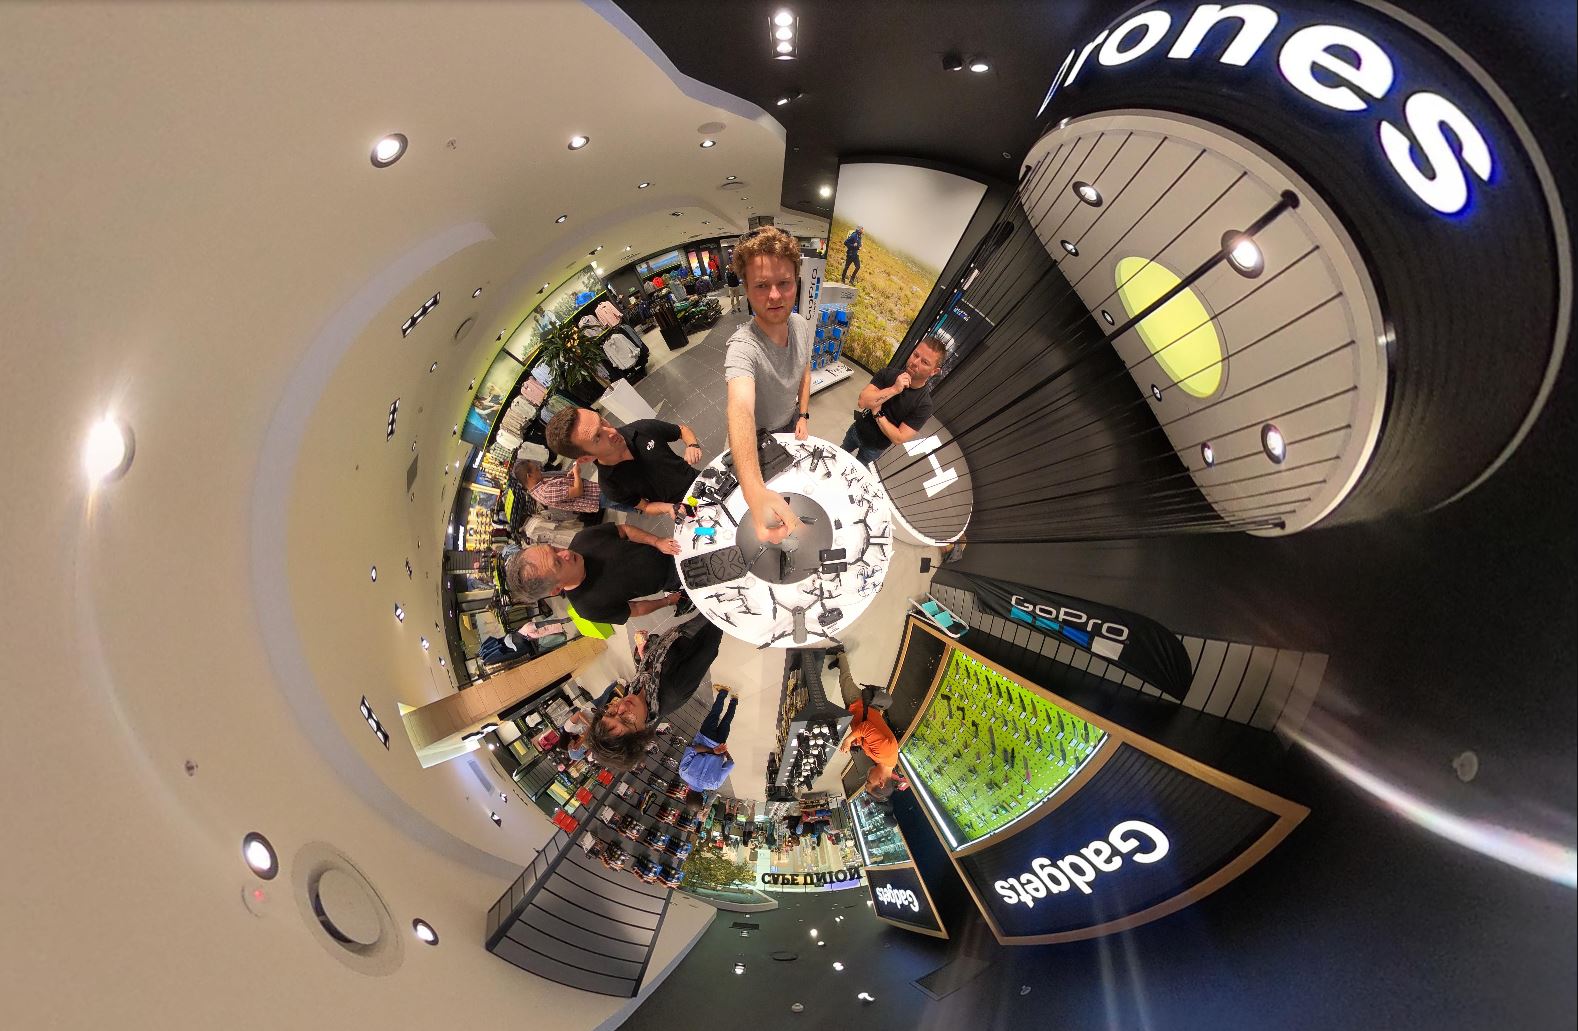 GoPro MAX sample photos posted! - 360 